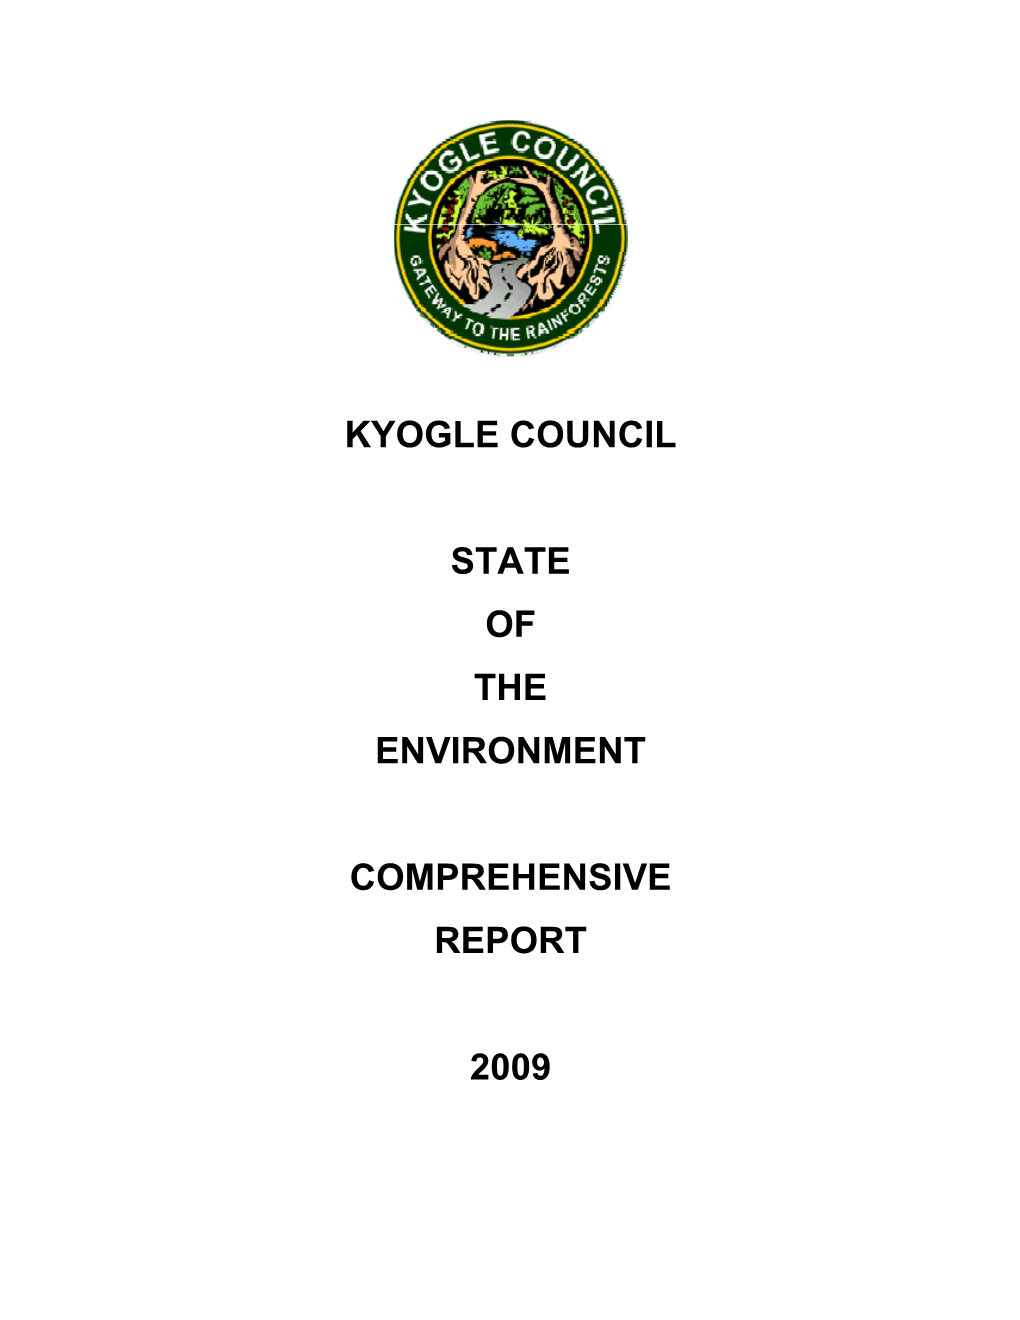 Kyogle Council State of the Environment Report 2004